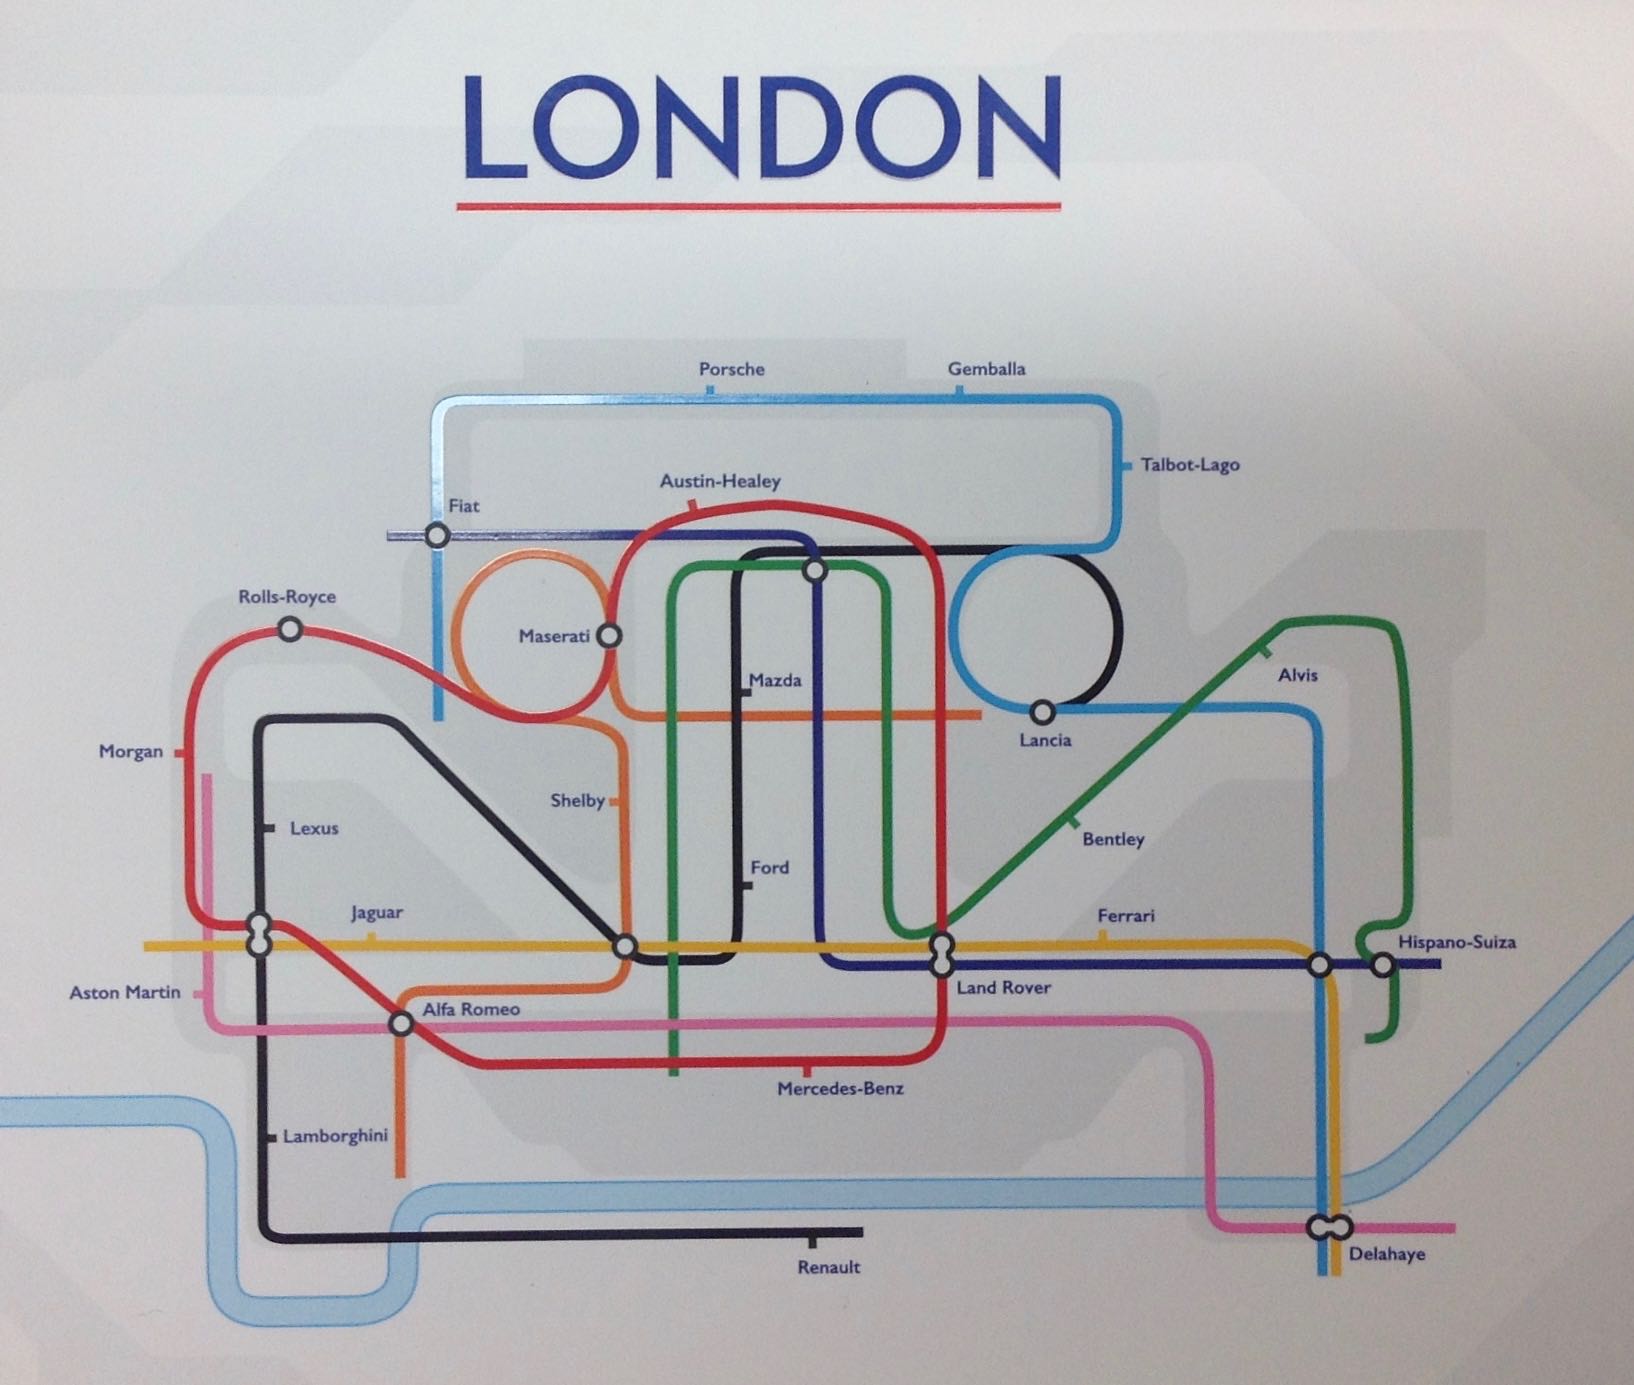 , Cover story: London auction catalog mimics style of Underground route map, ClassicCars.com Journal